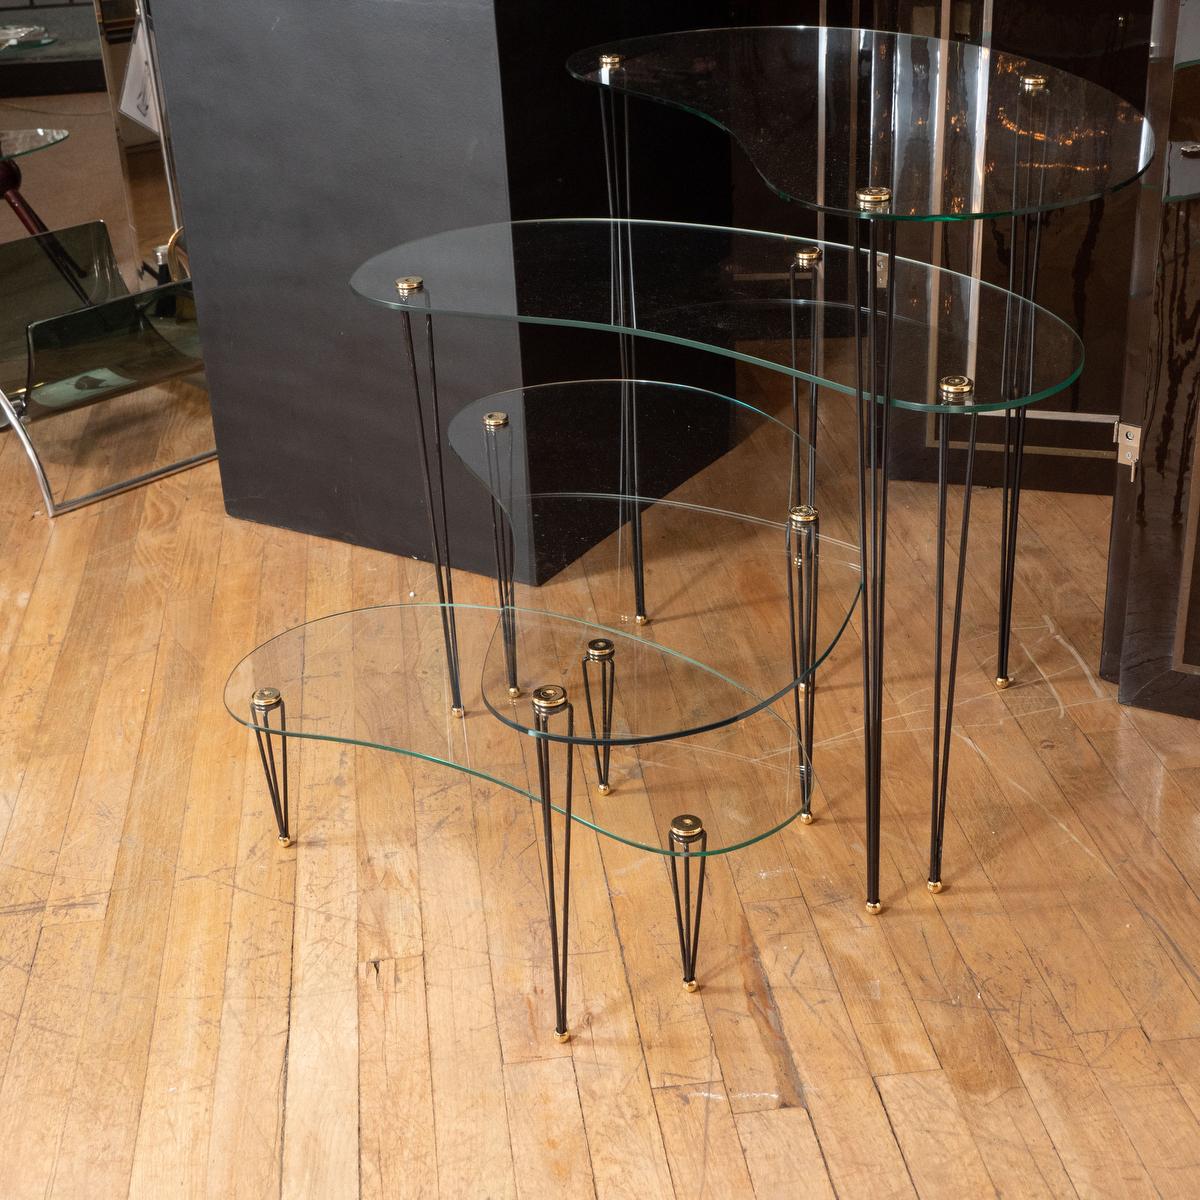 Quartet of glass kidney shaped graduated size tables with black metal legs.
Measurements for individual tables:
Small - 23.5